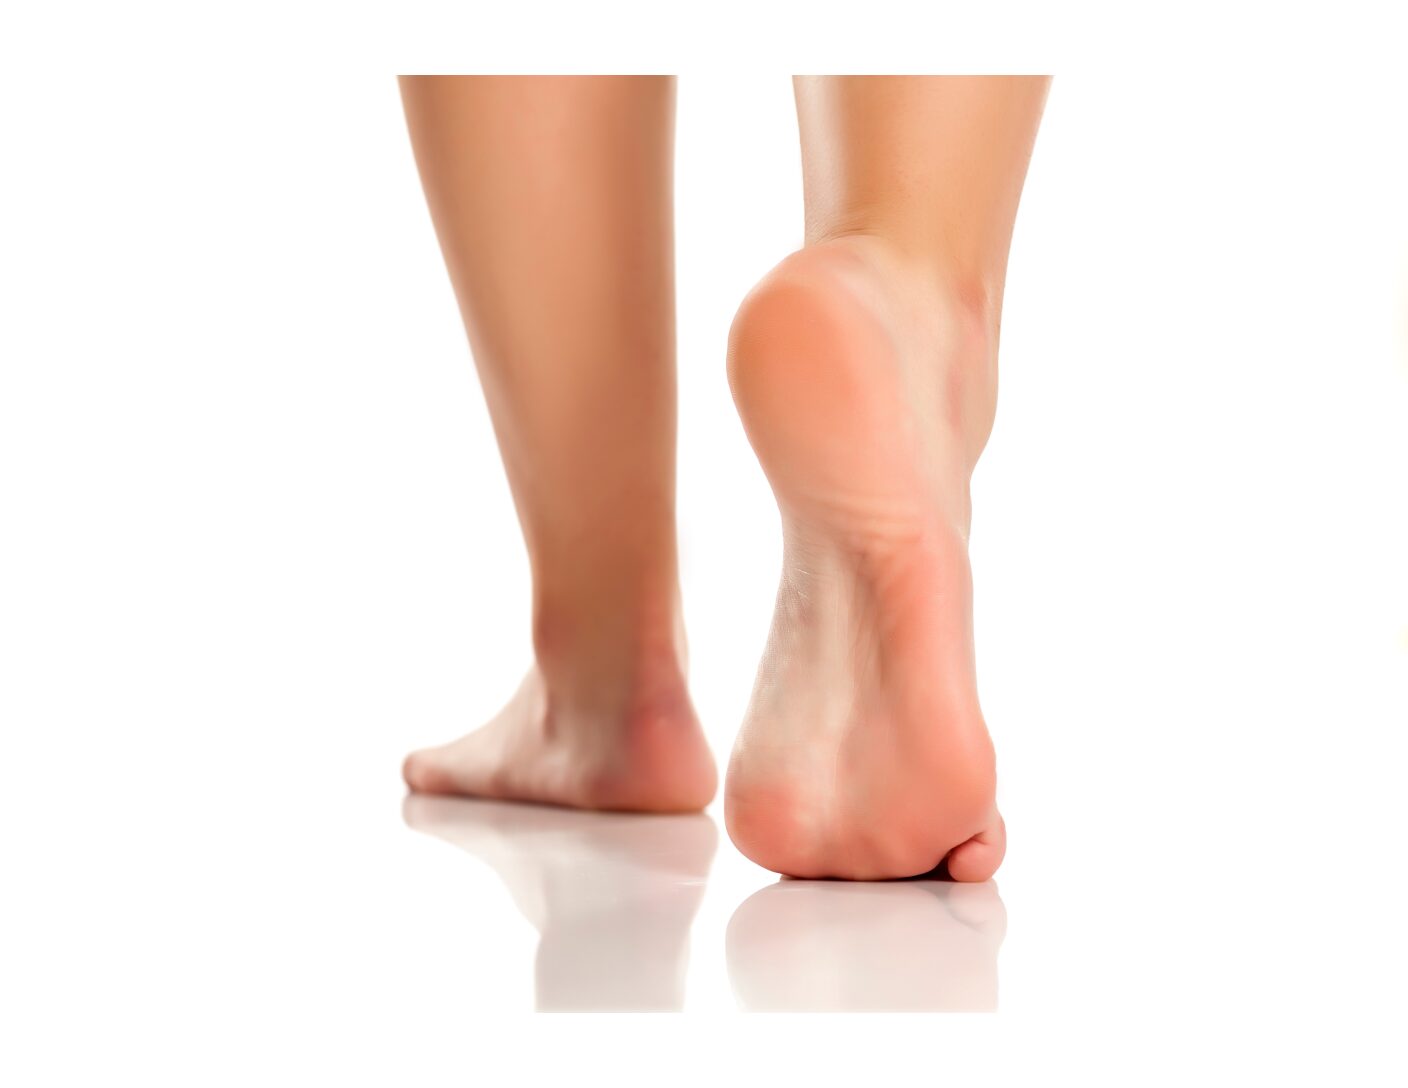 Foot Care Tips: How to Maintain Happy and Healthy Feet